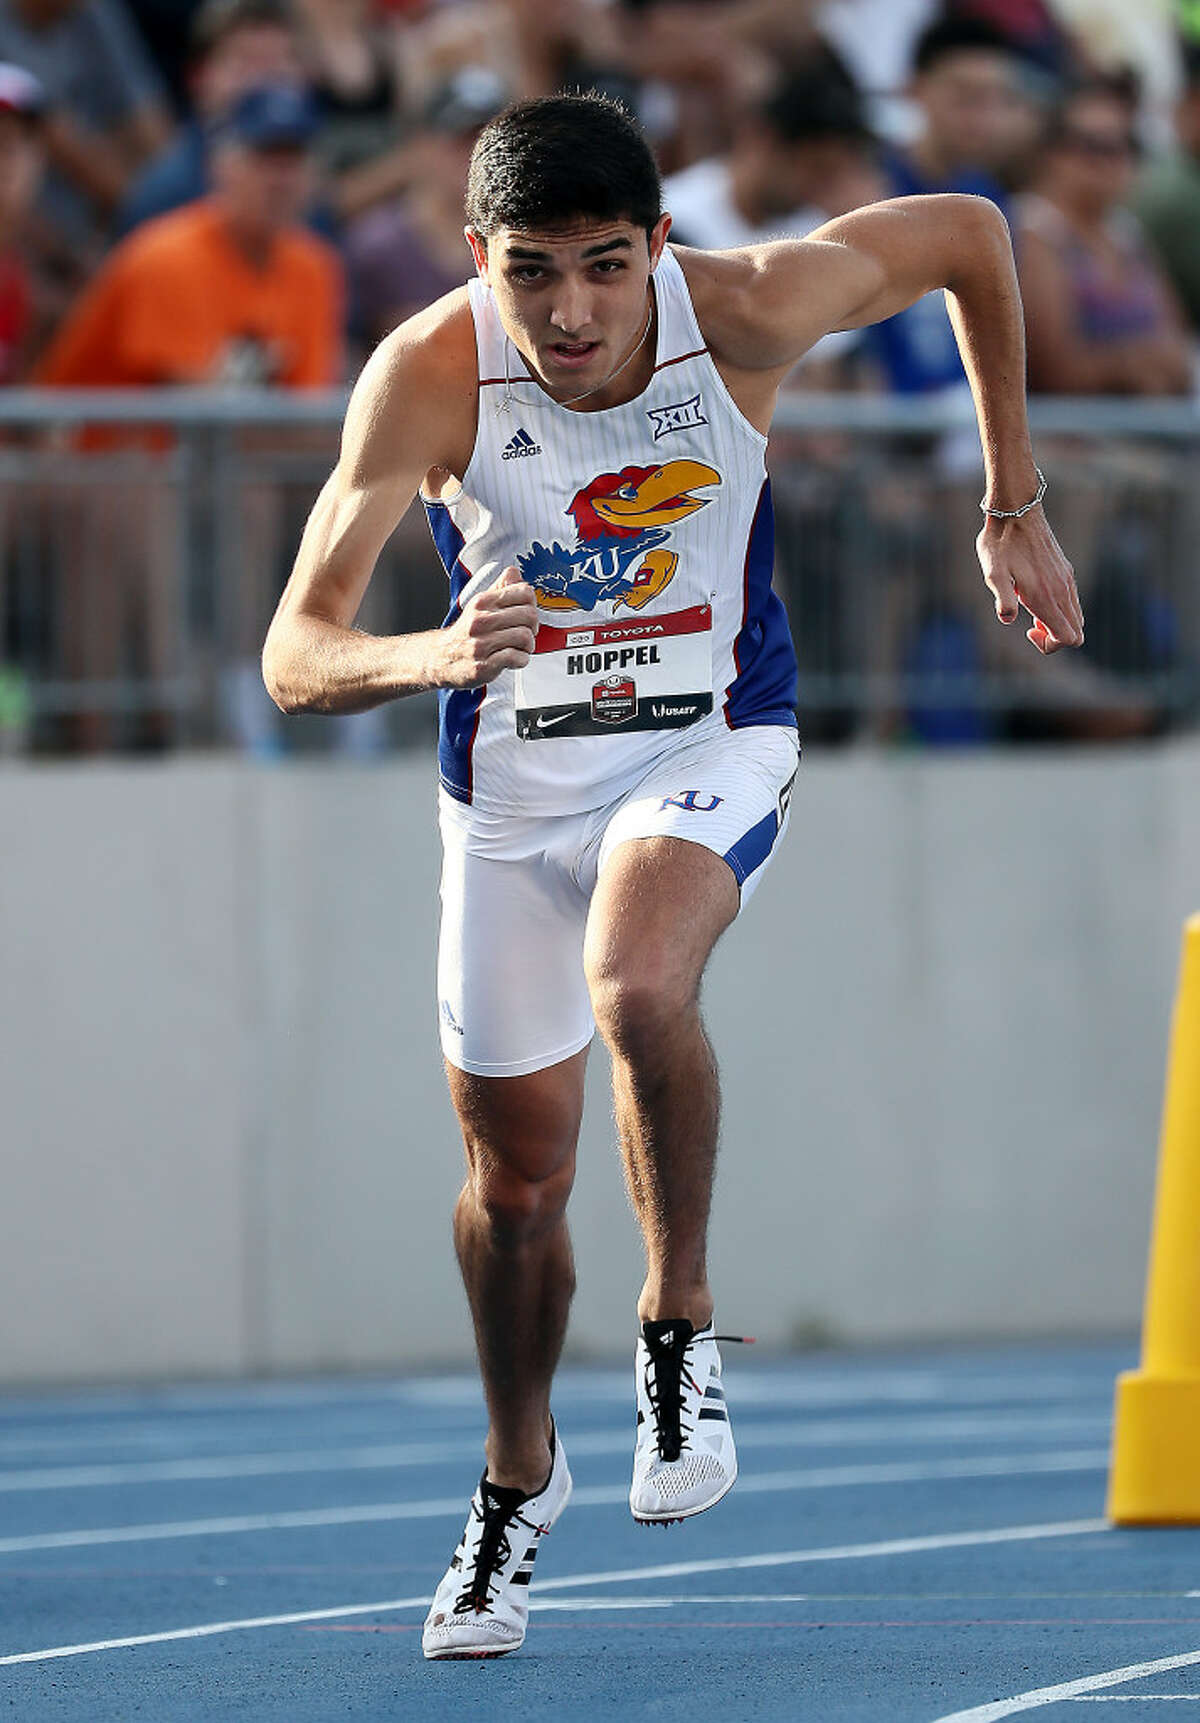 Bryce Hoppel competes in the Men's 800 Meter semifinal during the 2019 USATF Outdoor Championships at Drake Stadium on July 25, 2019 in Des Moines, Iowa. (Photo by Jamie Squire/Getty Images)